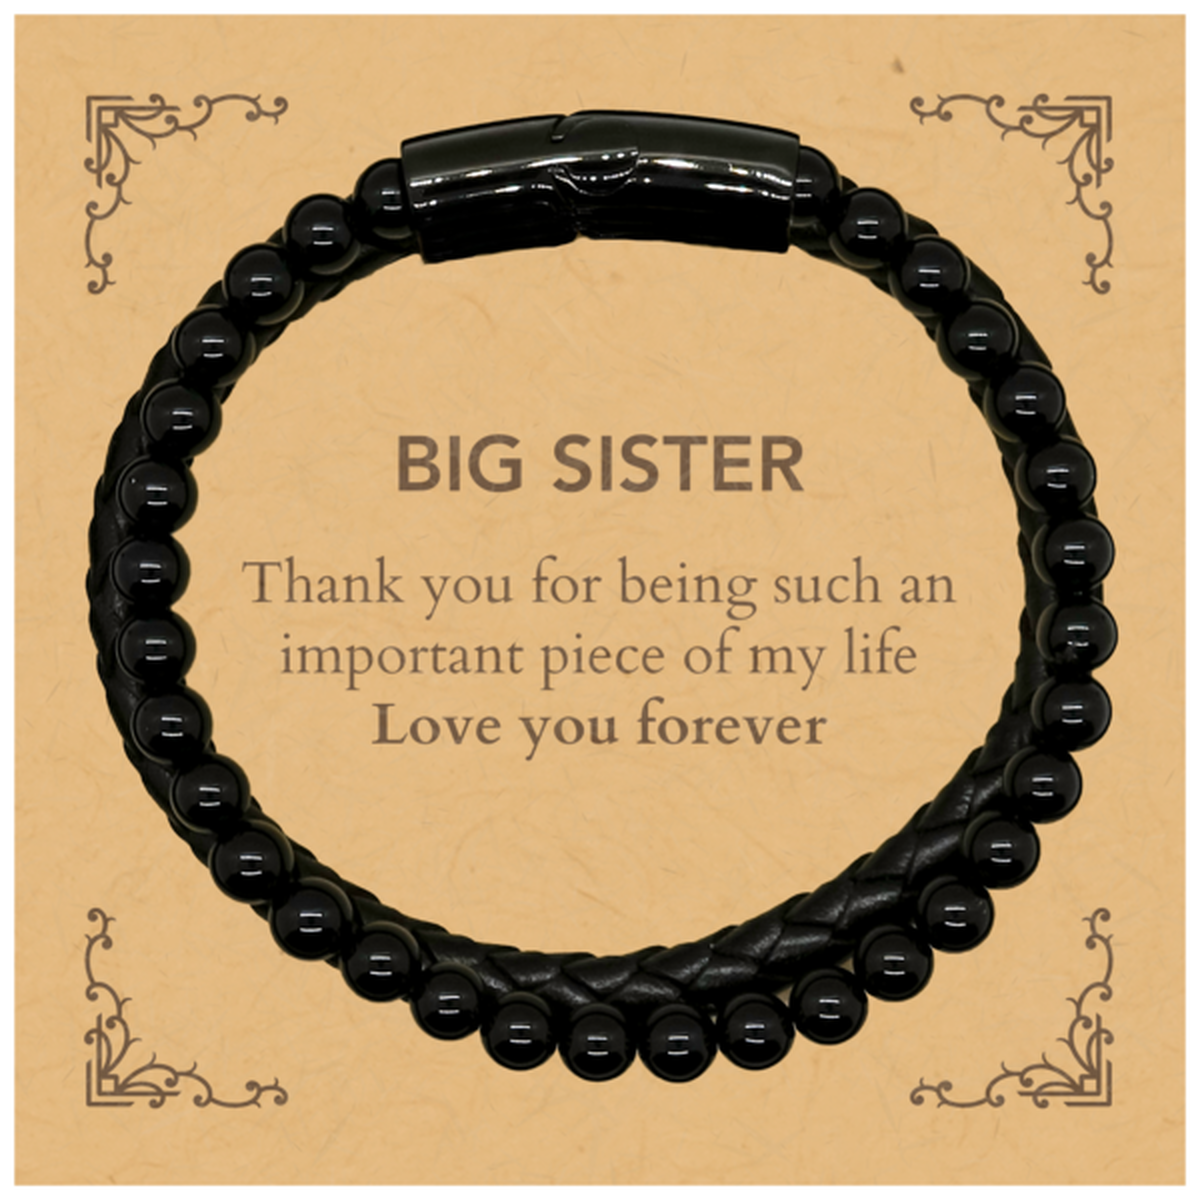 Appropriate Big Sister Stone Leather Bracelets Epic Birthday Gifts for Big Sister Thank you for being such an important piece of my life Big Sister Christmas Mothers Fathers Day